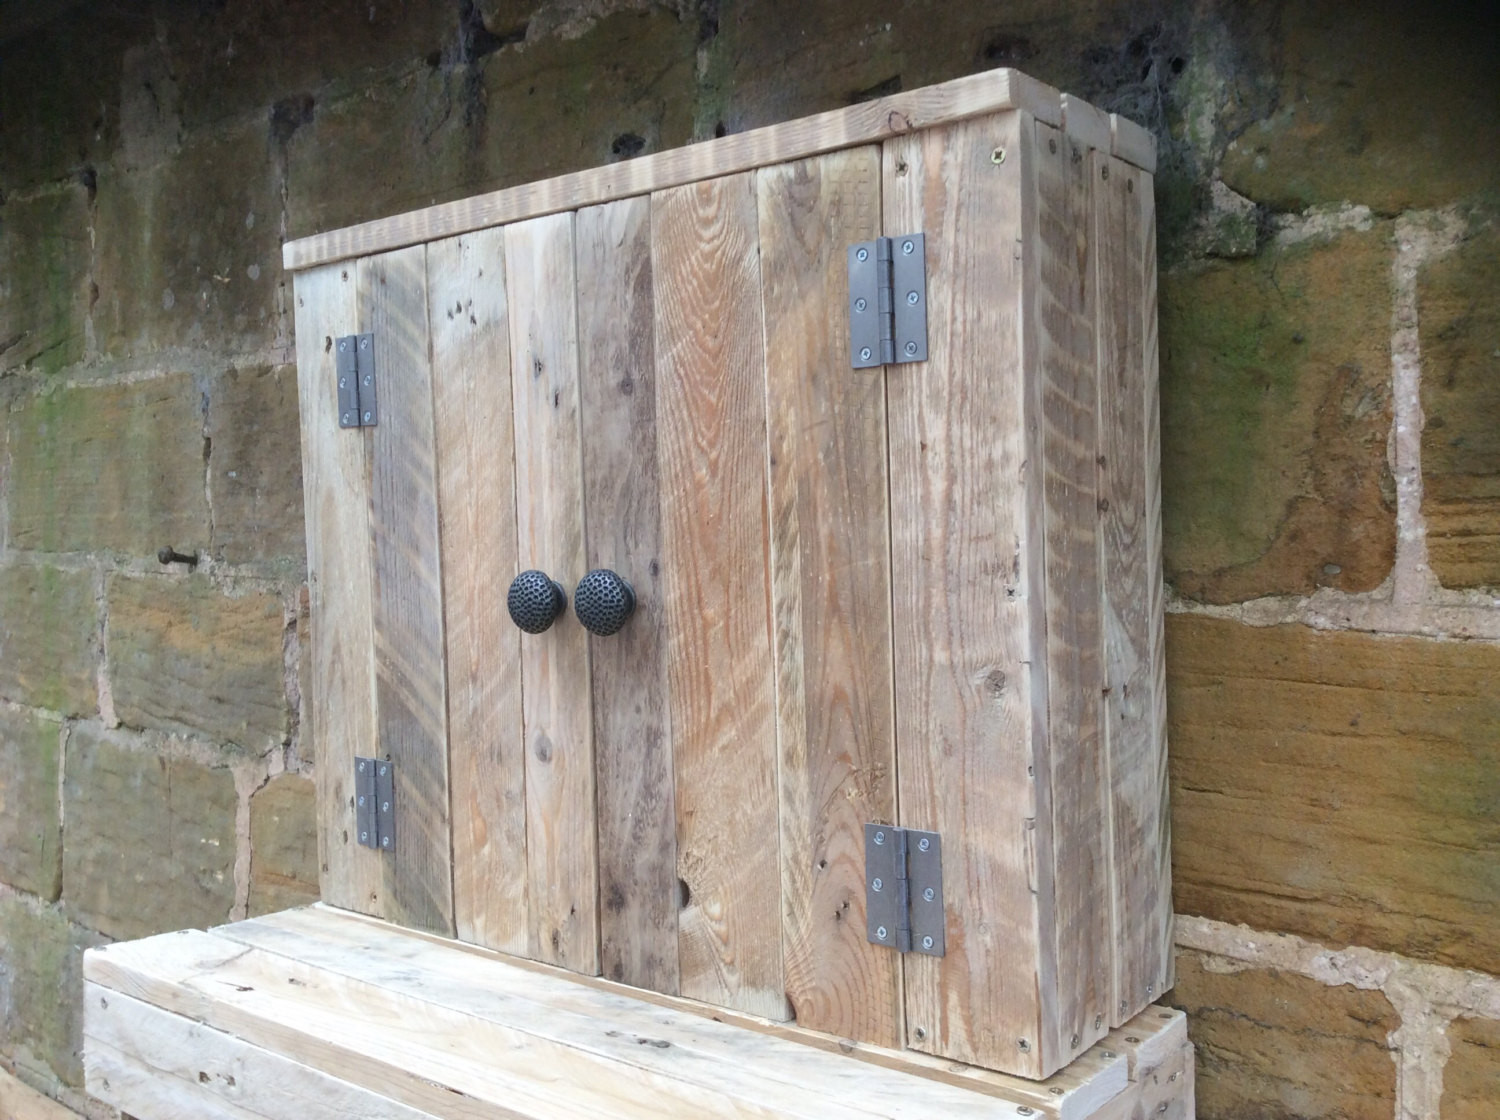 Rustic Wall Cabinet For Bathroom
 Rustic Wall Mounted Bathroom Cabinet made from reclaimed